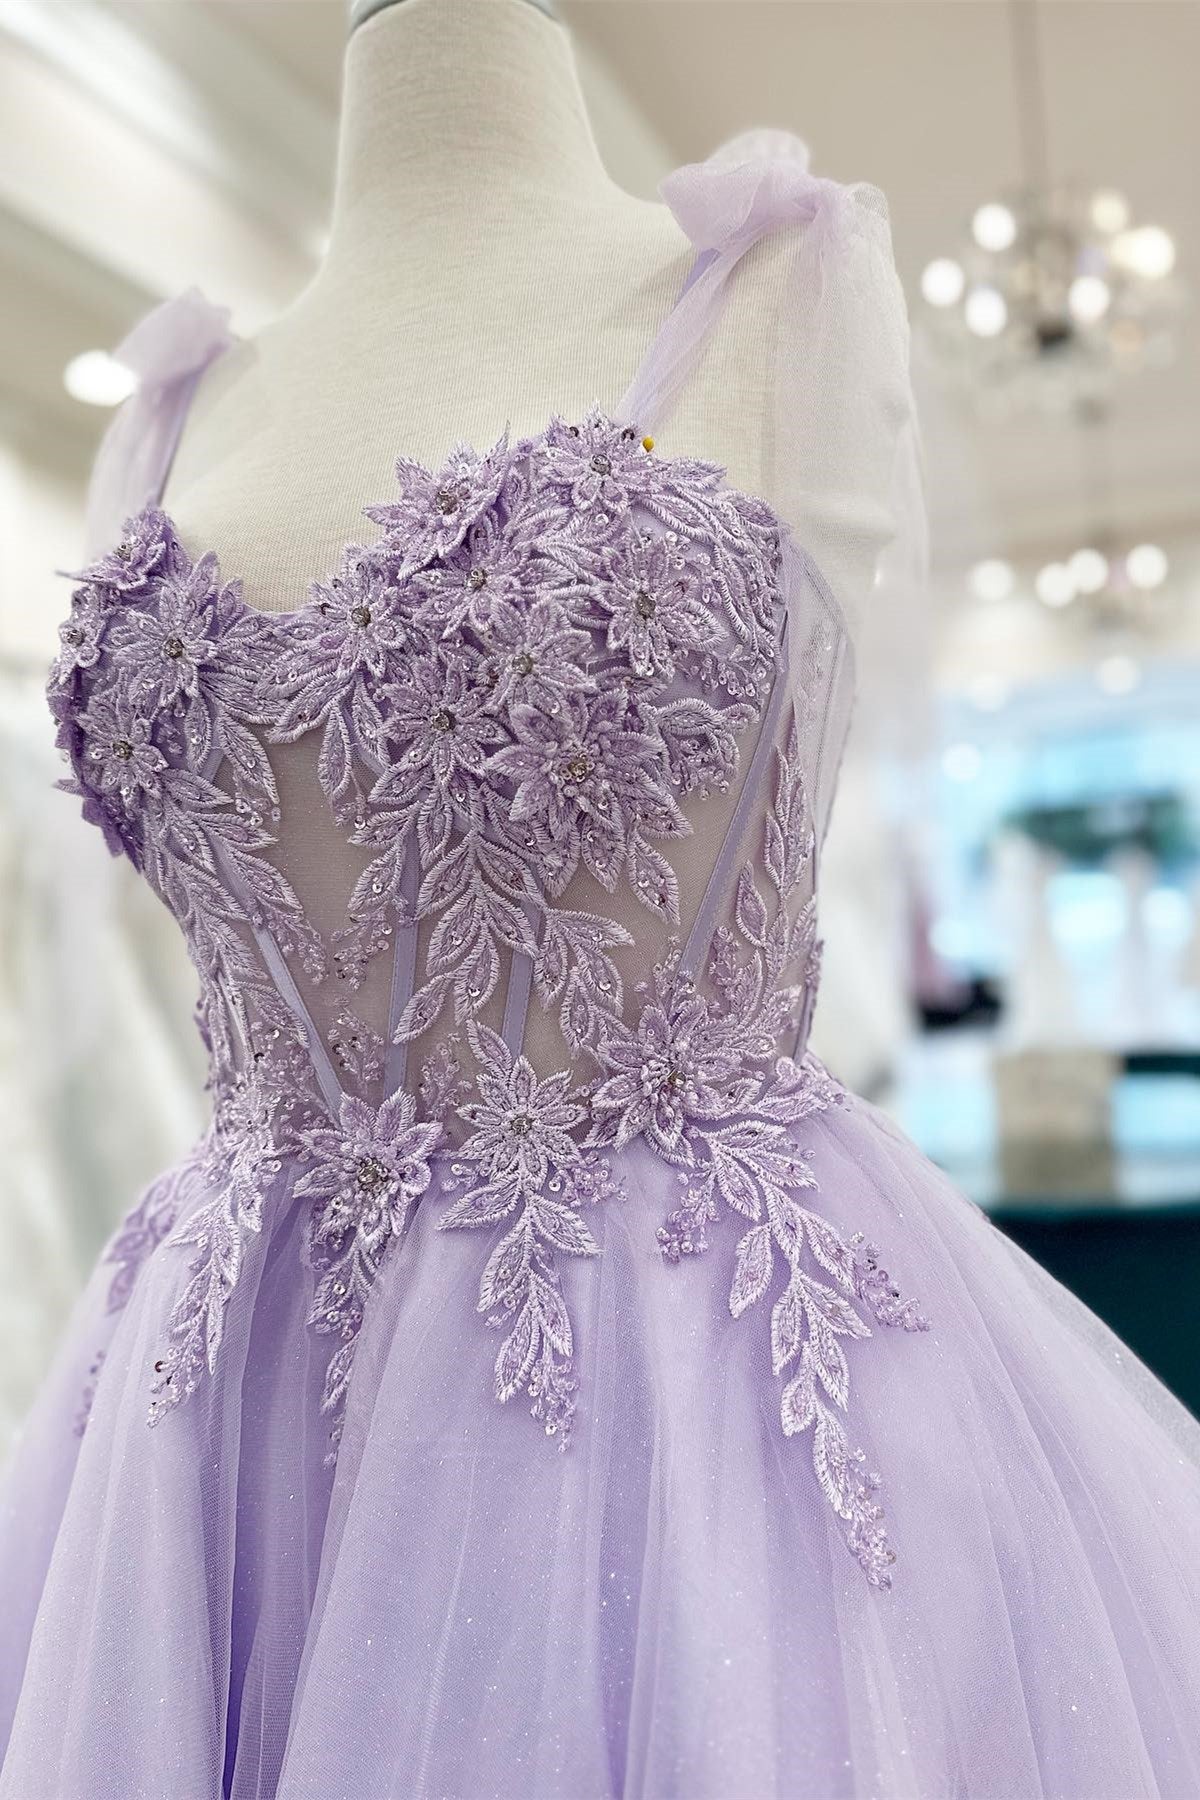 Sierra | Lavender Floral Appliques Sweetheart A-Line Short Homecoming Dress